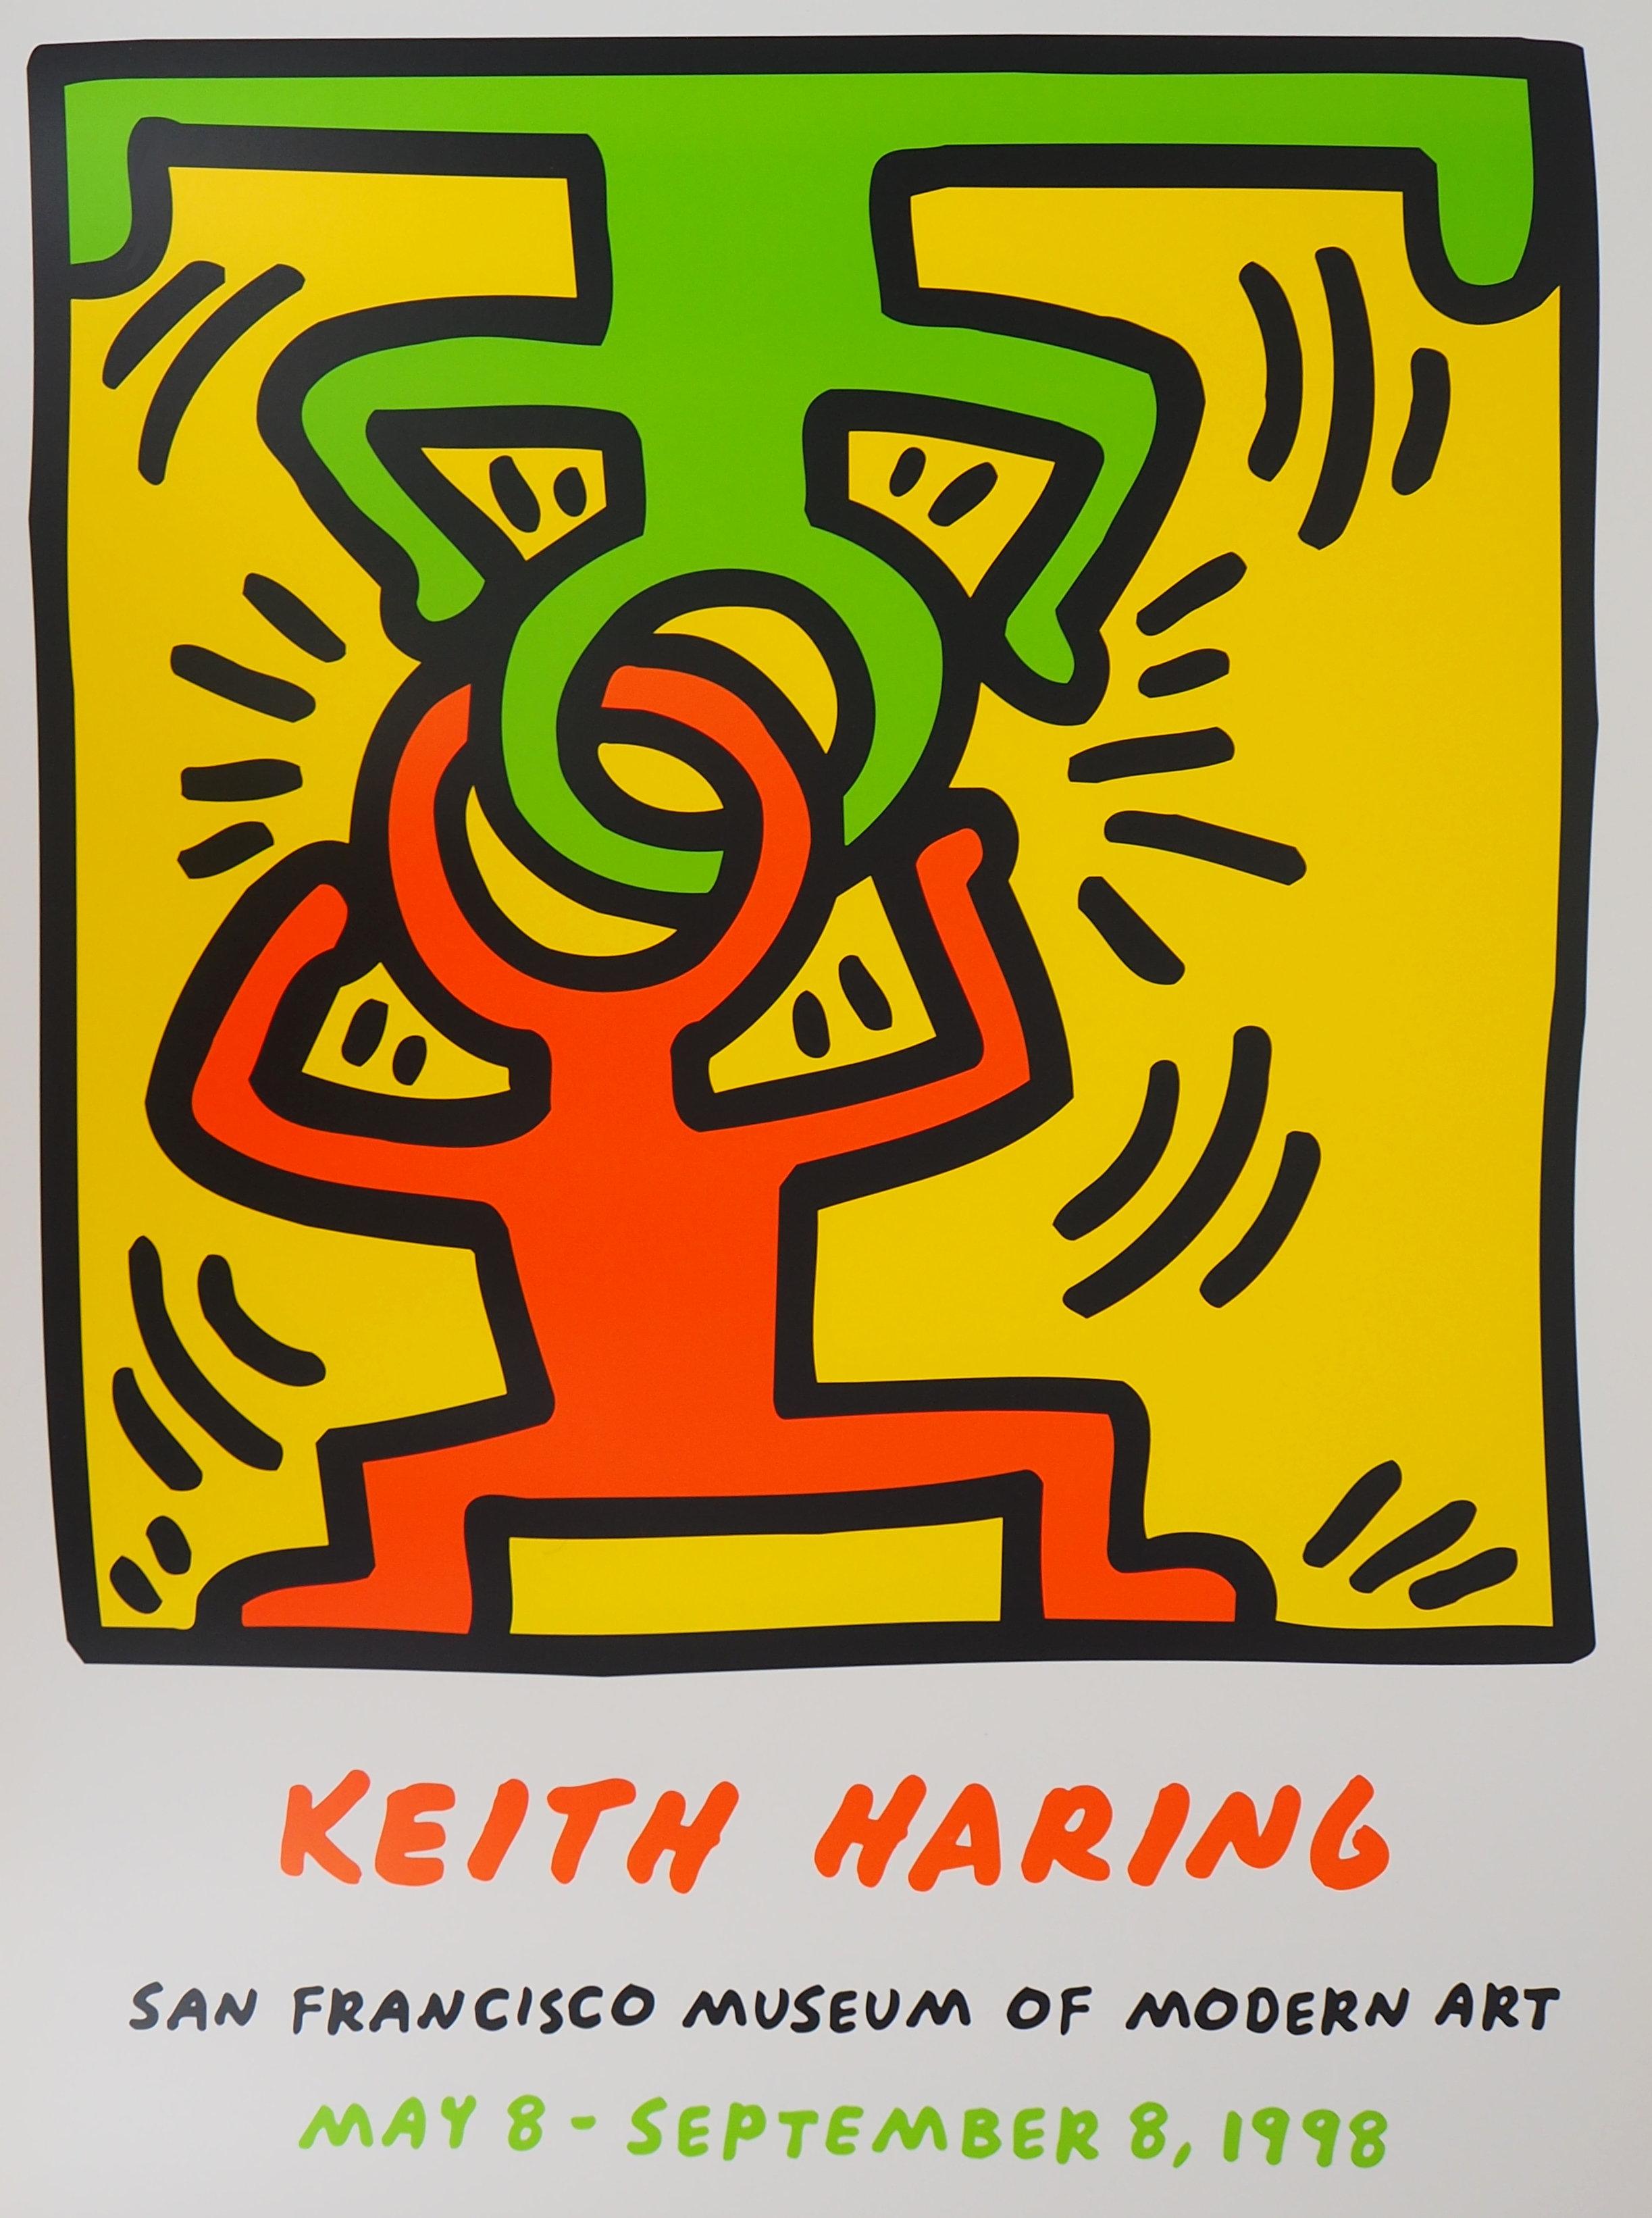 Headstand (San Francisco Museum of Modern Art) - Exhibition Poster - Print by Keith Haring